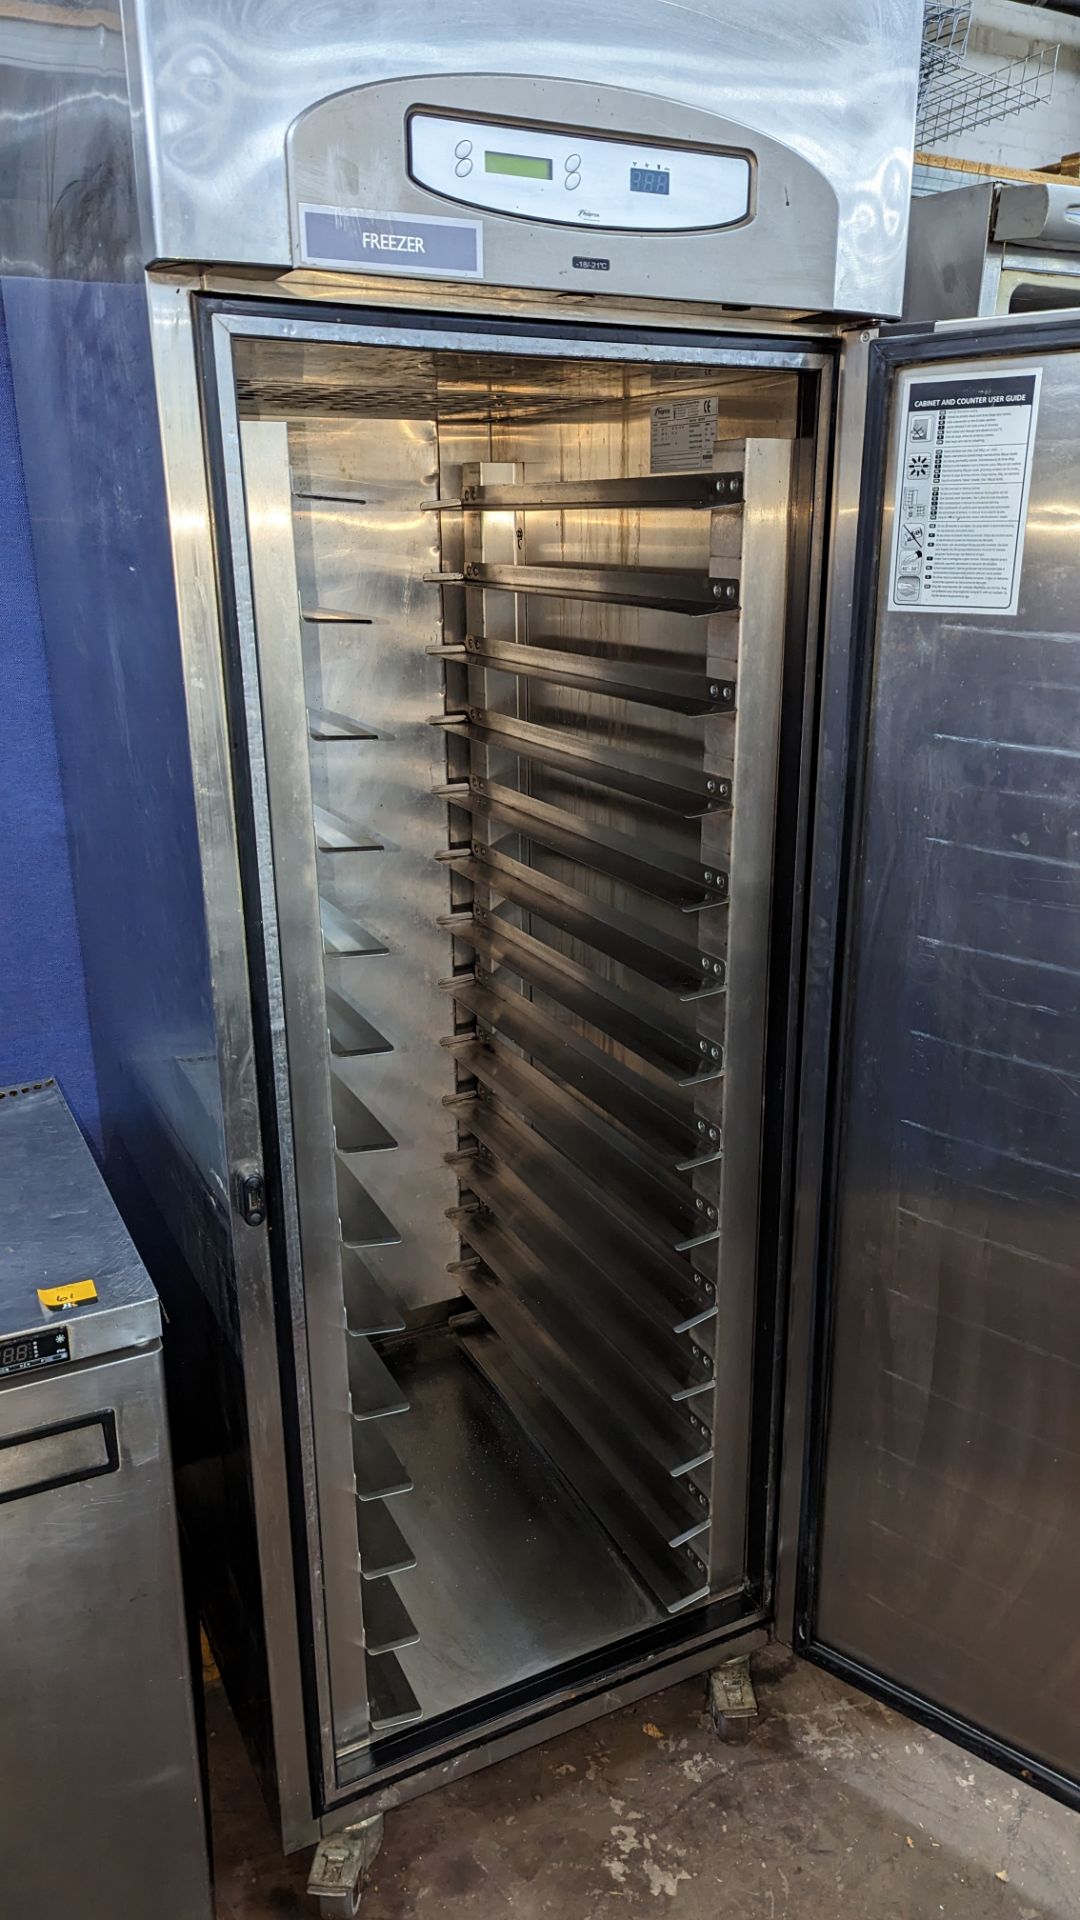 Foster stainless steel tall mobile freezer - Image 3 of 4